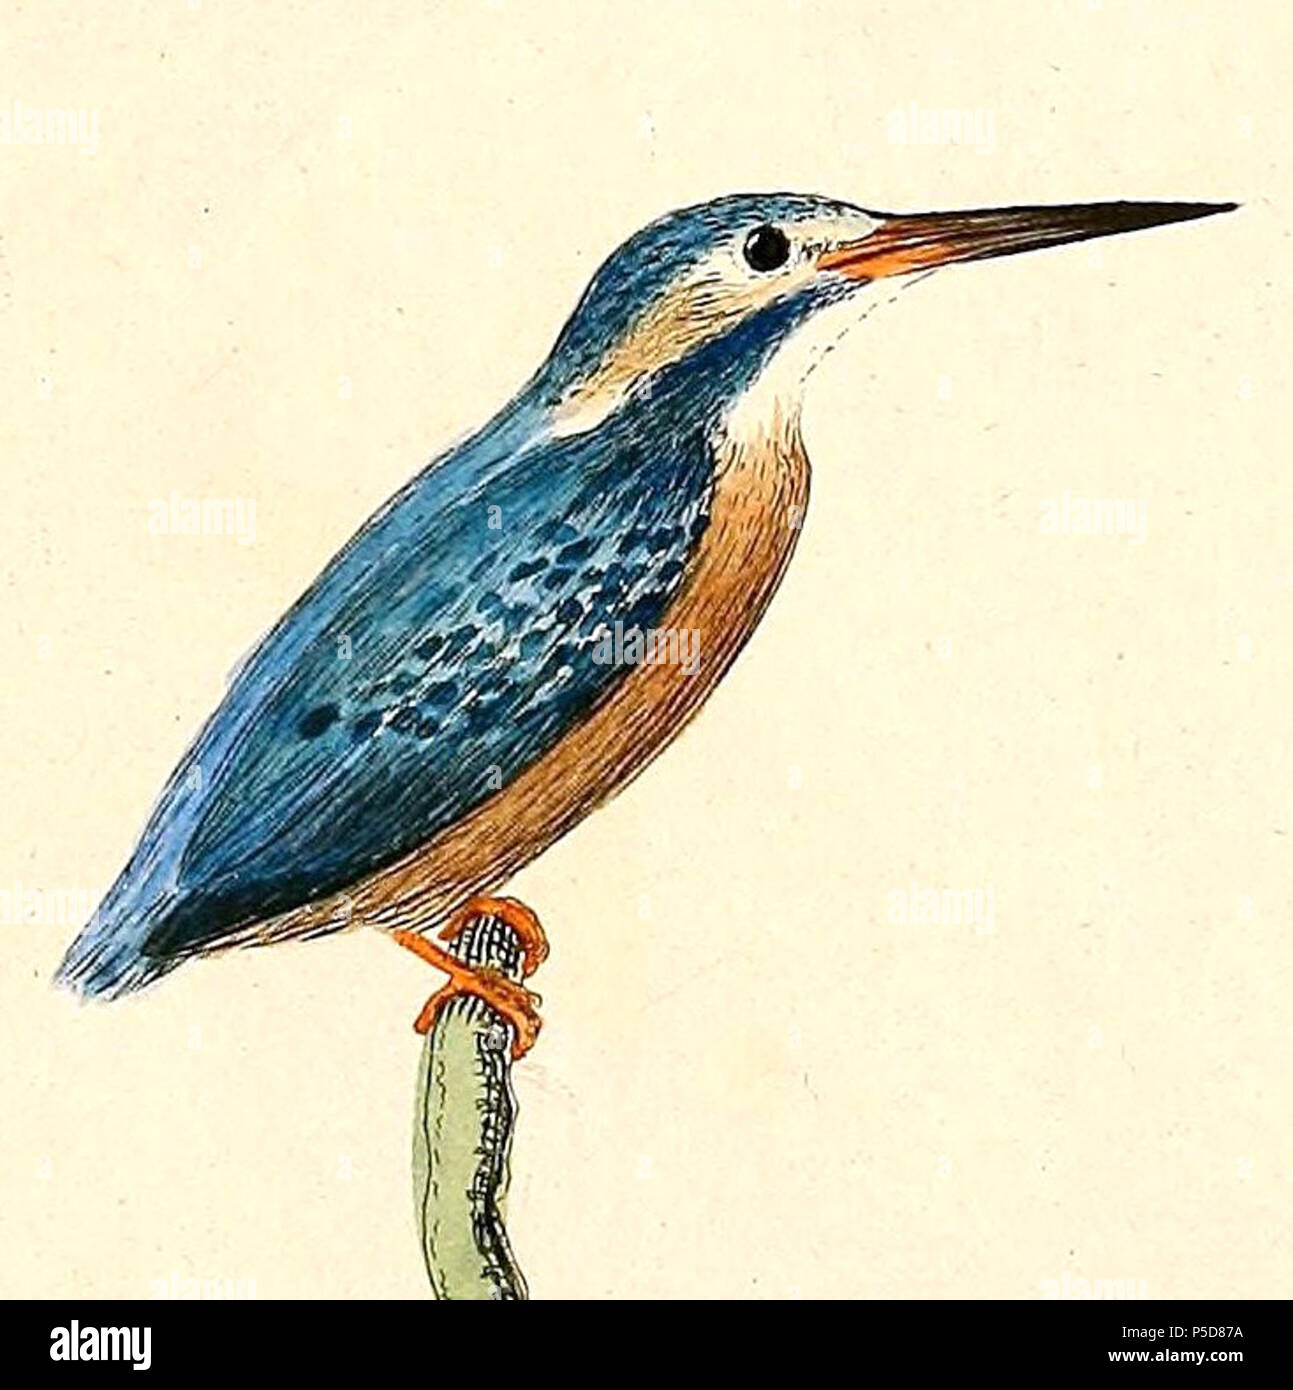 N/A.  English: « Alcedo bengalensis » = Alcedo atthis bengalensis (Subspecies of Common Kingfisher) Français: « Alcedo bengalensis » = Alcedo atthis bengalensis (Sous-espèce de Martin-pêcheur d'Europe) . 1832.   Heinrich von Kittlitz  (1799–1874)    Alternative names Kittlitz  Description German explorer, naturalist, officer and illustrator  Date of birth/death 16 February 1799 10 April 1874  Location of birth/death Wrocaw Mainz  Authority control  : Q62794 VIAF:79504674 ISNI:0000 0001 2029 290X LCCN:nr99012310 Botanist:Kittlitz Open Library:OL5341135A WorldCat 77 Alcedo atthis 1832 Stock Photo